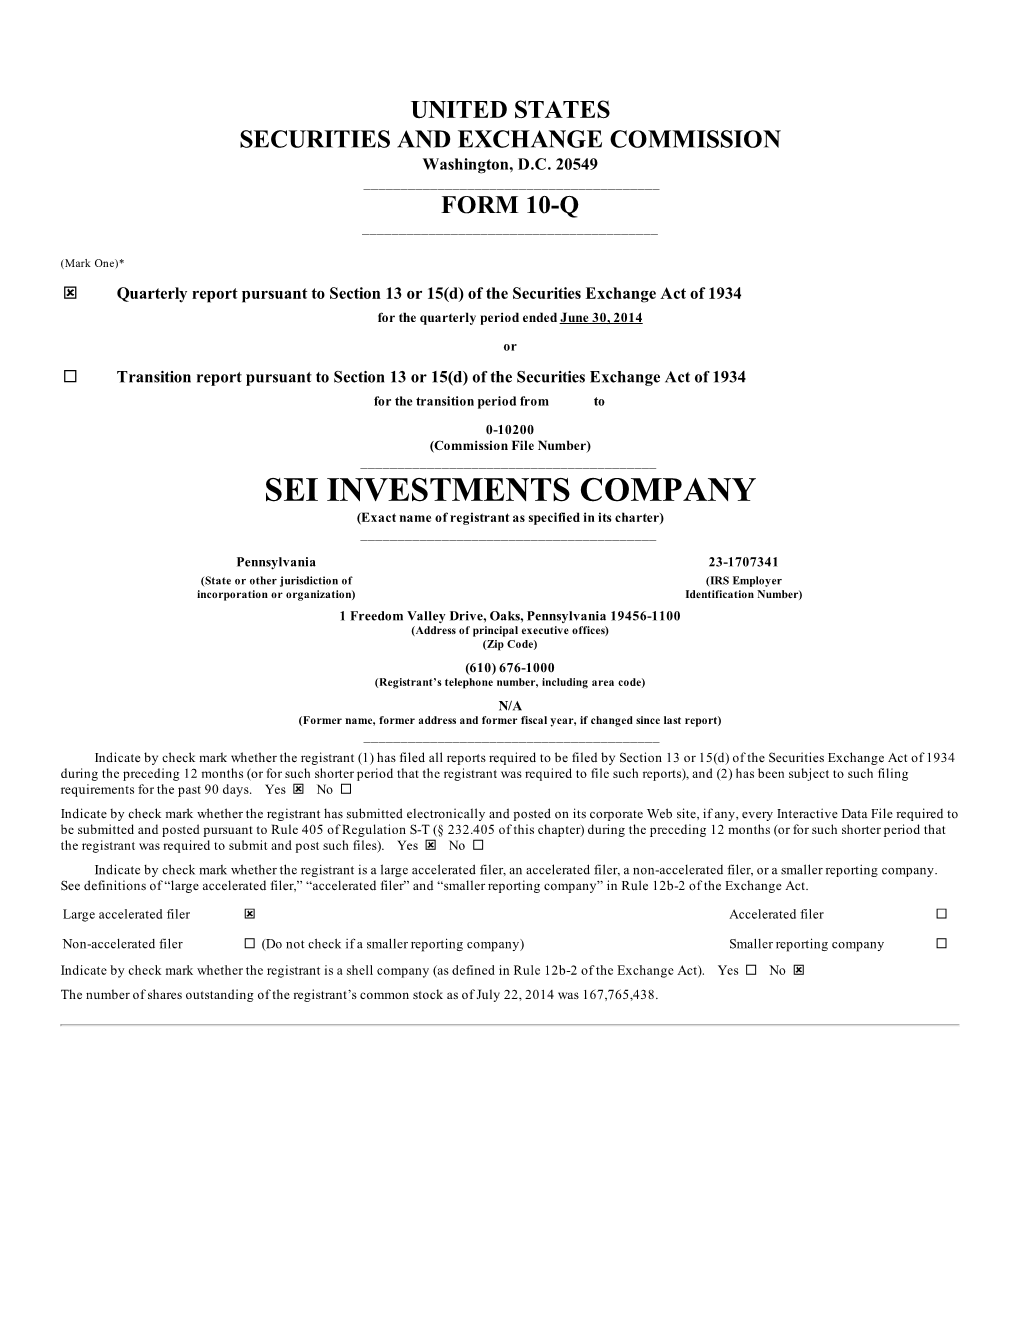 SEI INVESTMENTS COMPANY (Exact Name of Registrant As Specified in Its Charter) ______